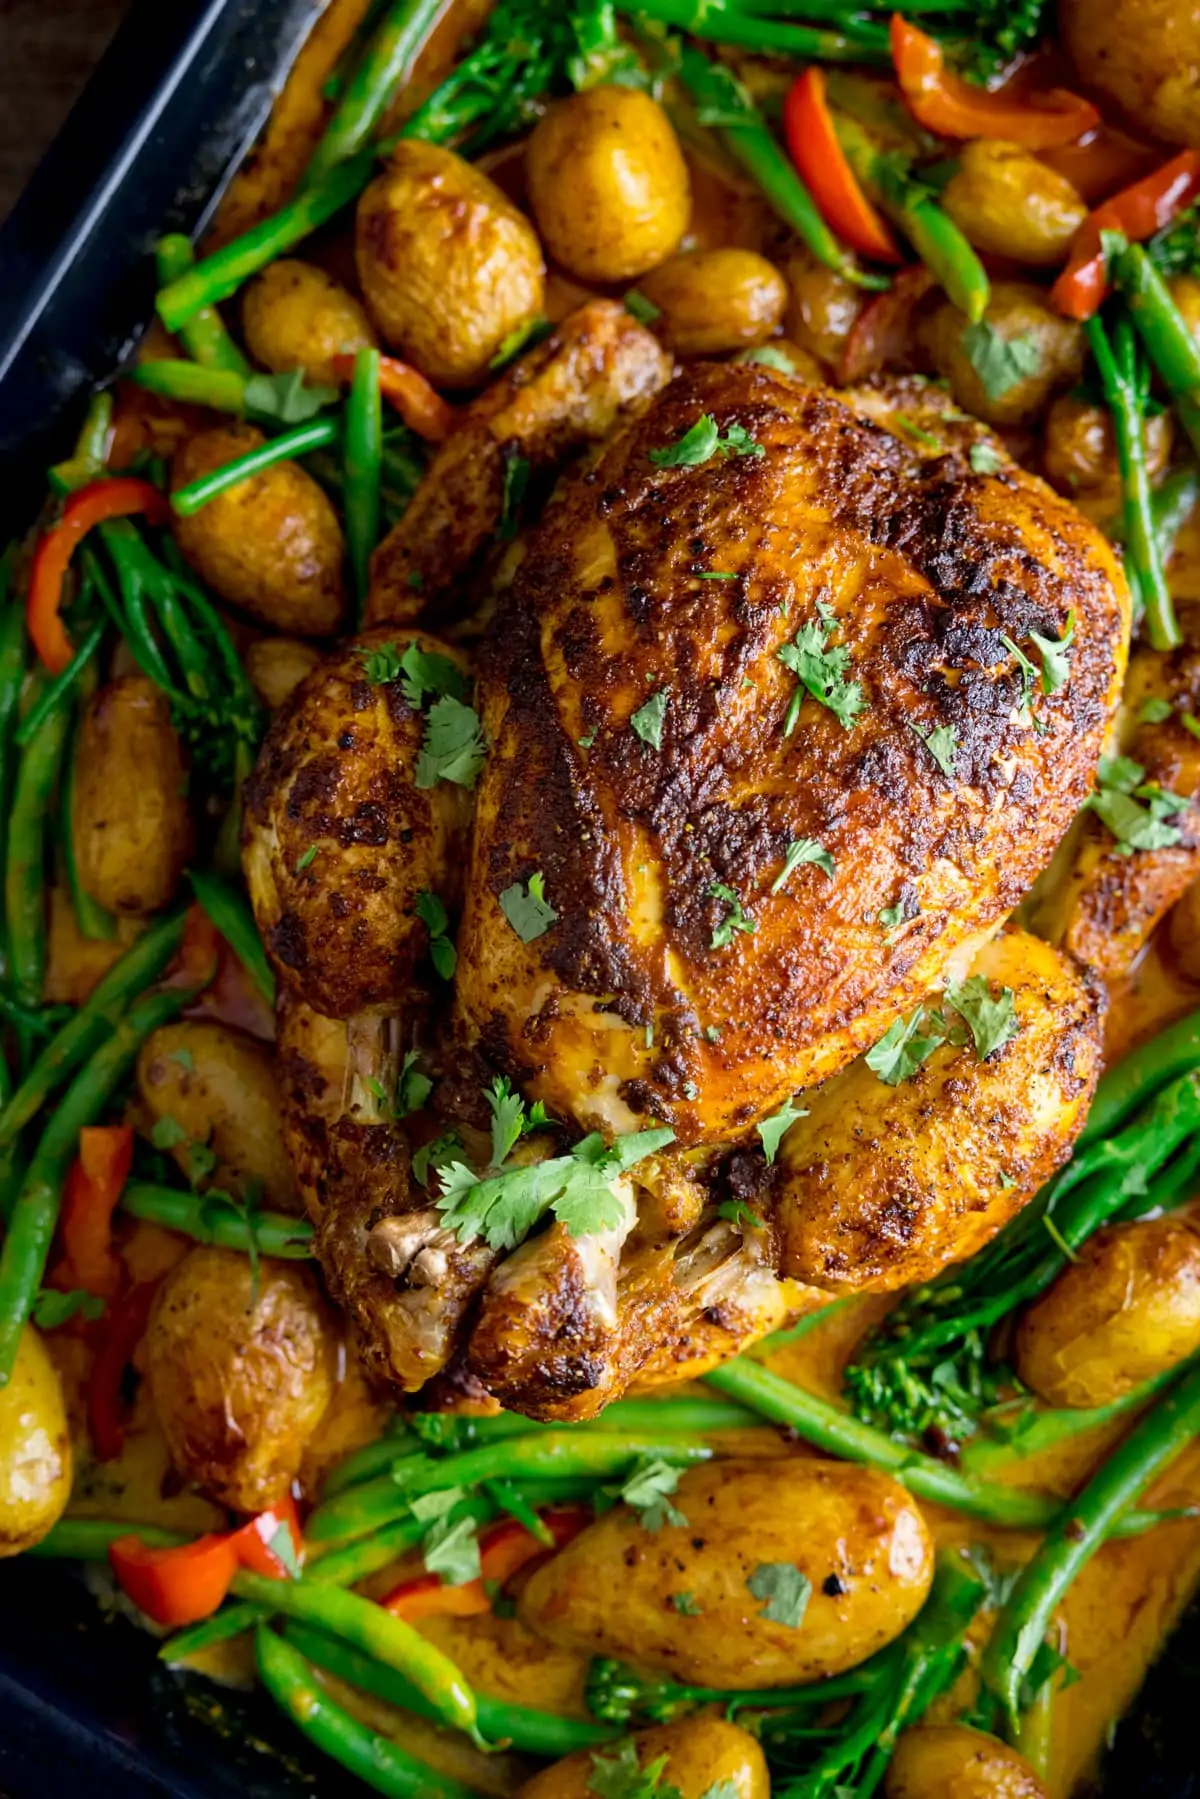 Overhead of a whole roast chicken in a baking tray with potatoes, peppers, green beans, broccoli and curry sauce